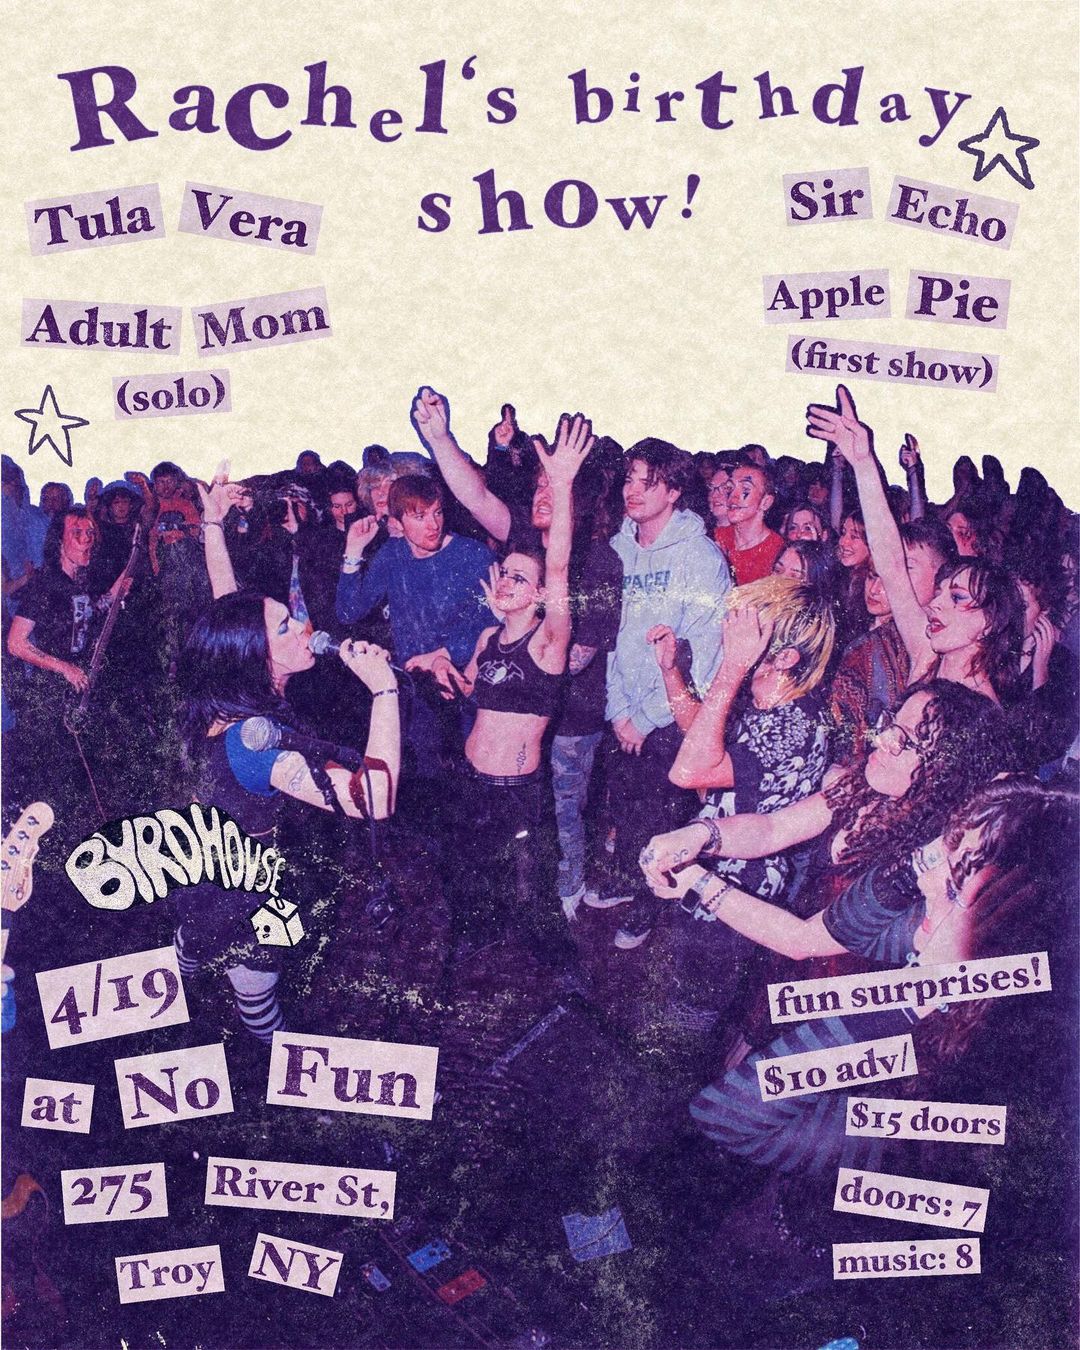 Rachel's Bday Show - Tula Vera / Sir Echo / Adult Mom (Solo) / Apple Pie (first show) at No Fun in Troy, NY on 4/19/2024